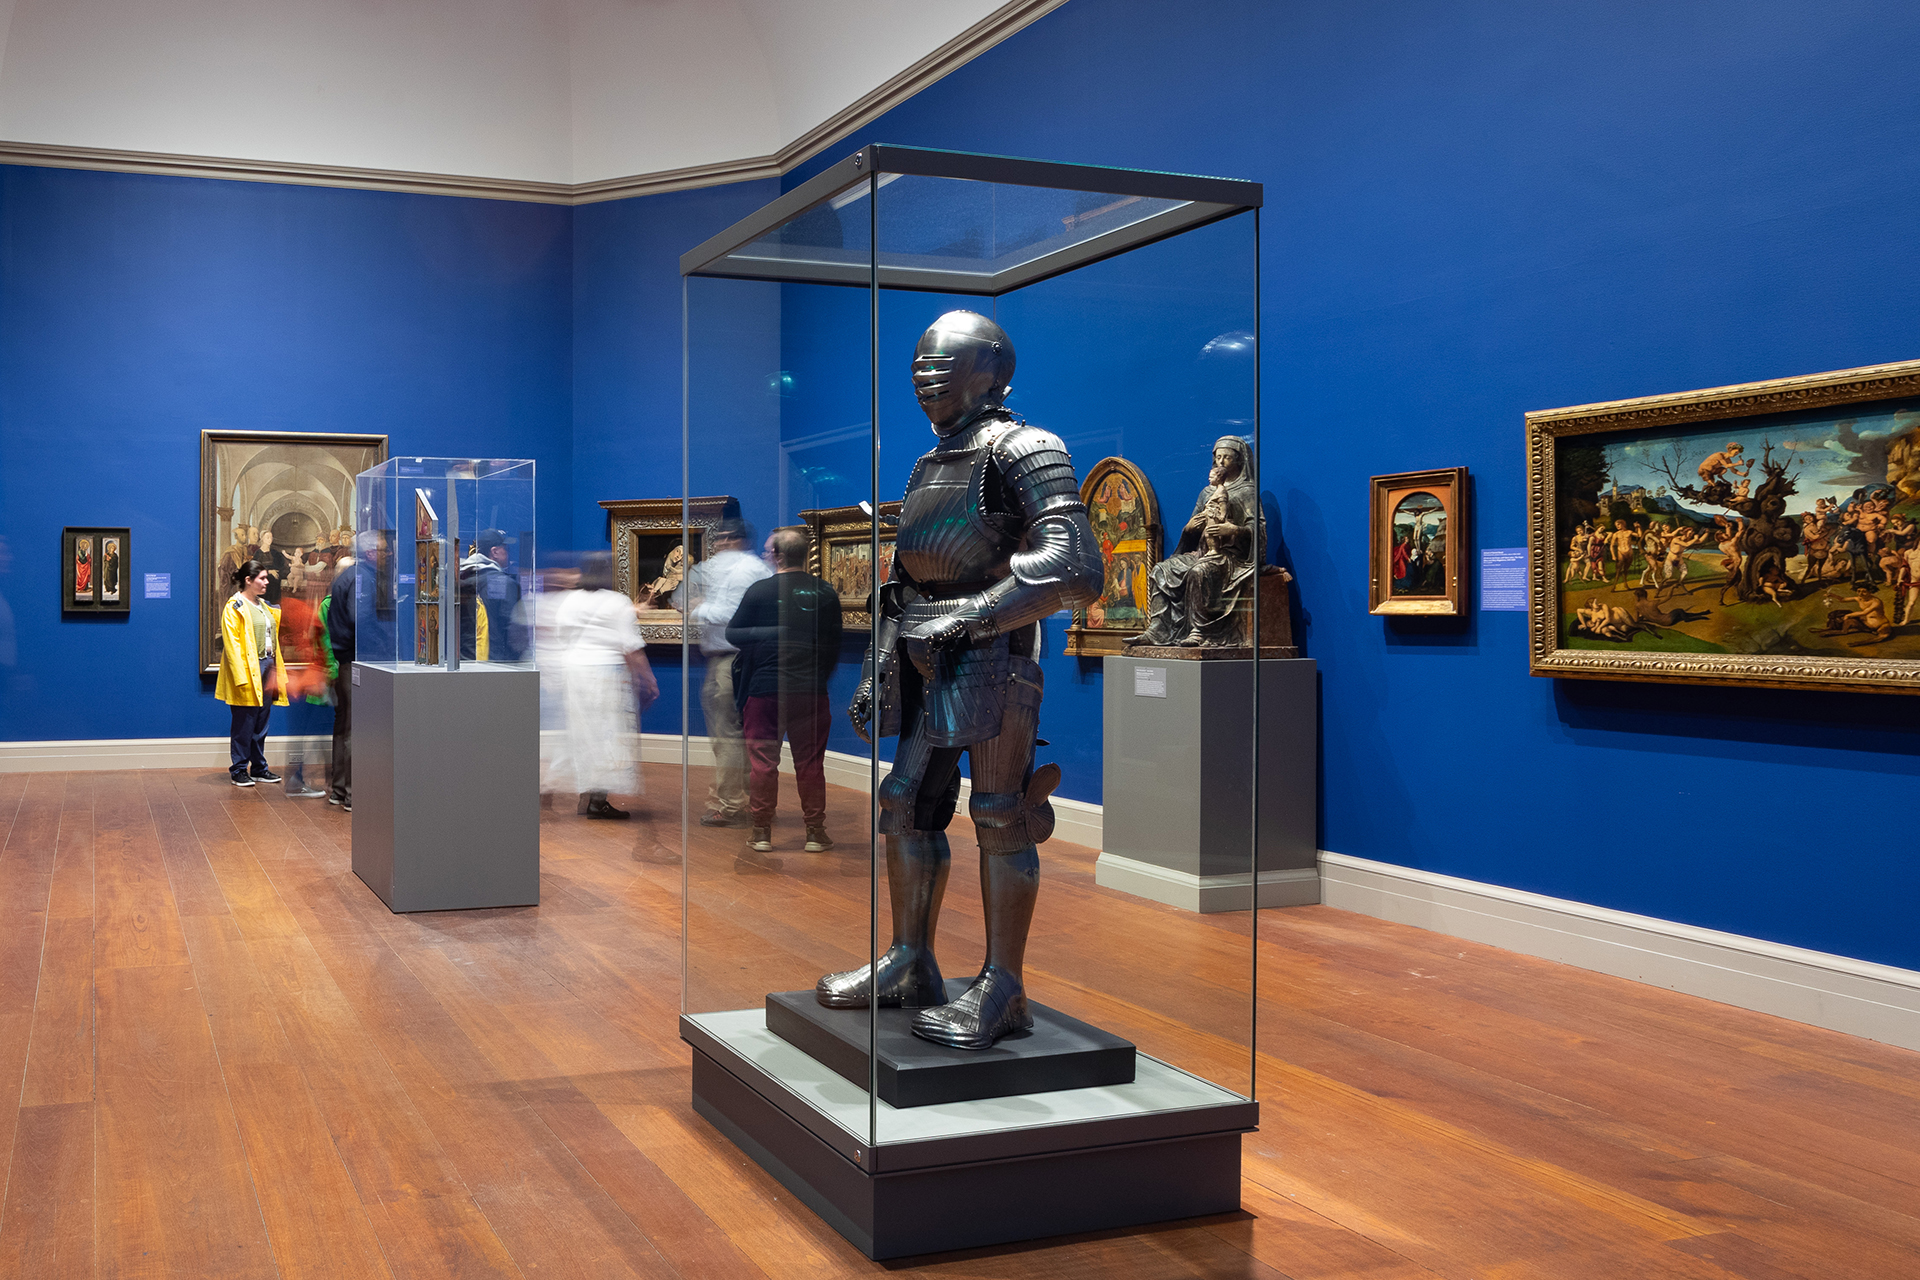 A suit of armor on display in a European art gallery